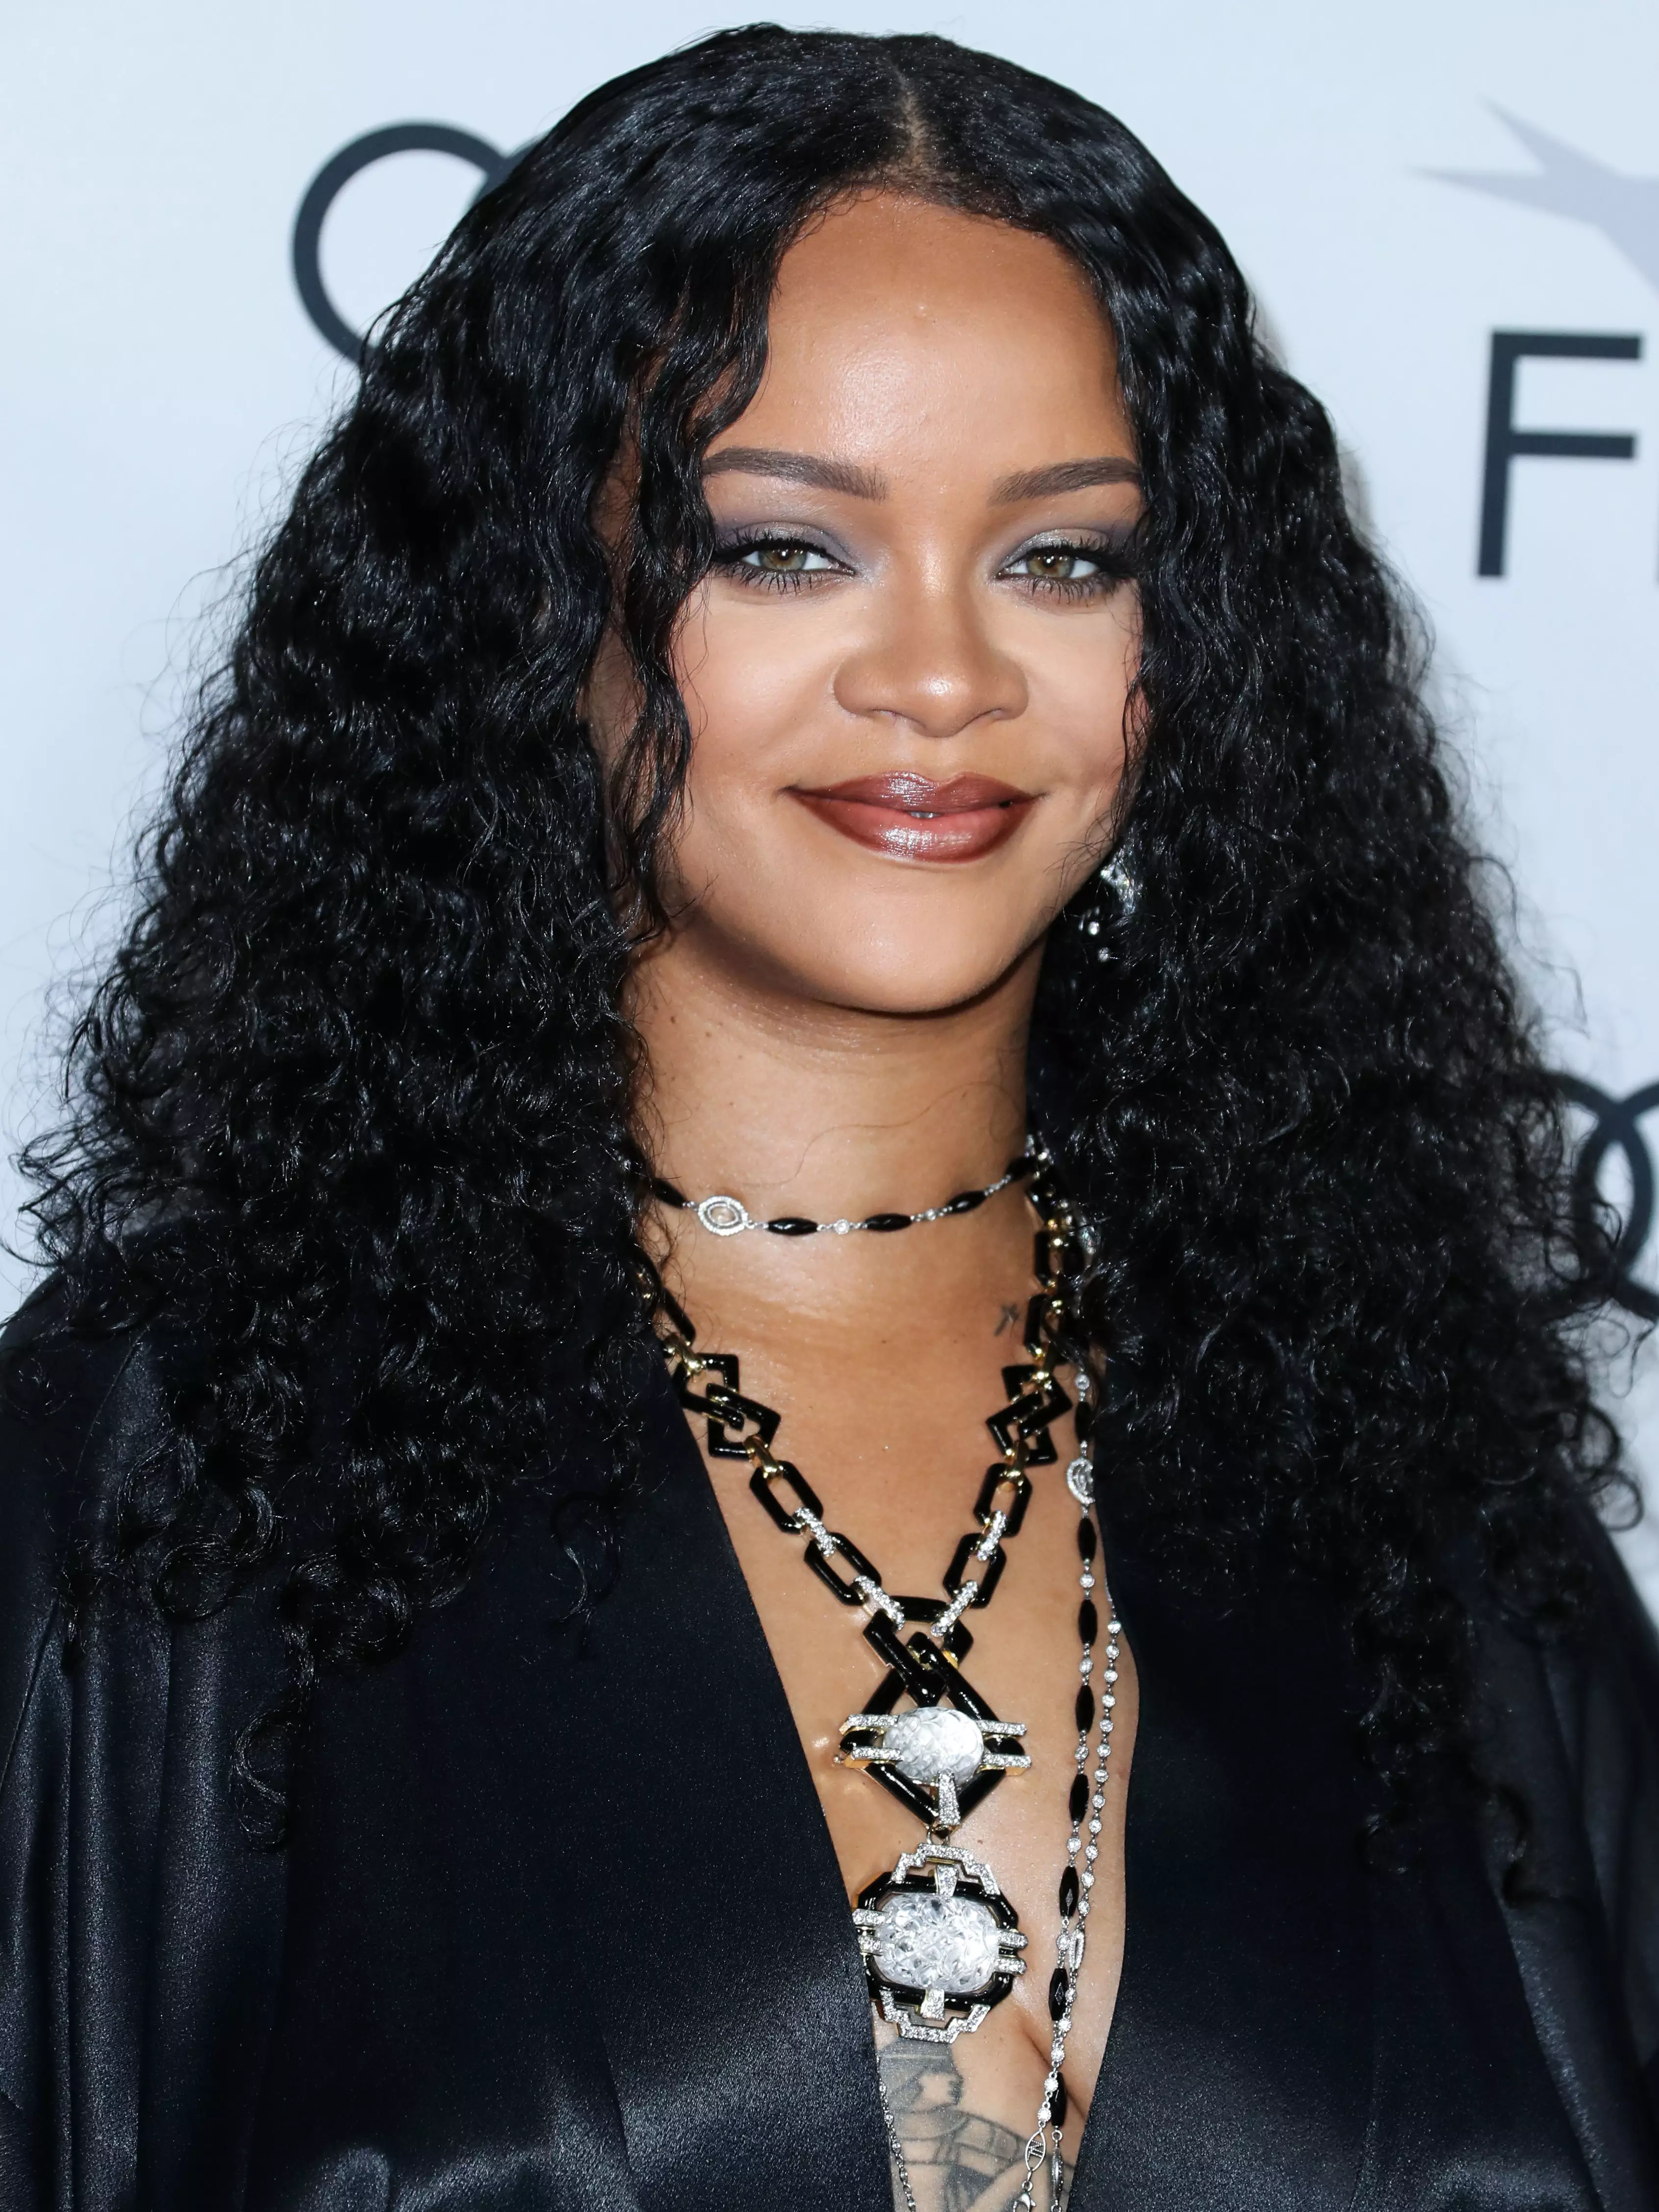 Fans recently called for Rihanna to be named the new head of state for Barbados.